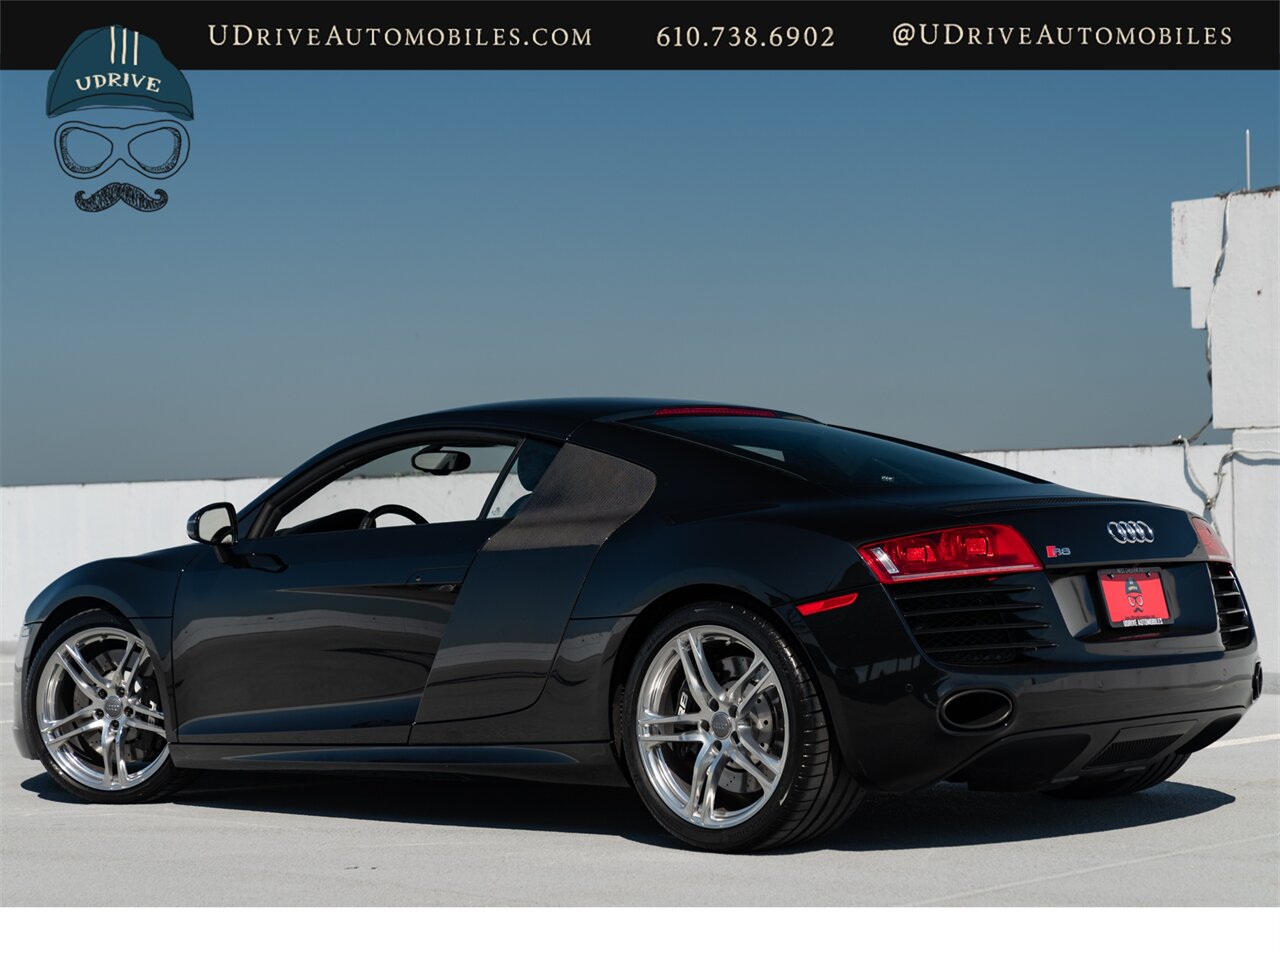 2009 Audi R8 Quattro  4.2L V8 6 Speed Manual - Photo 4 - West Chester, PA 19382